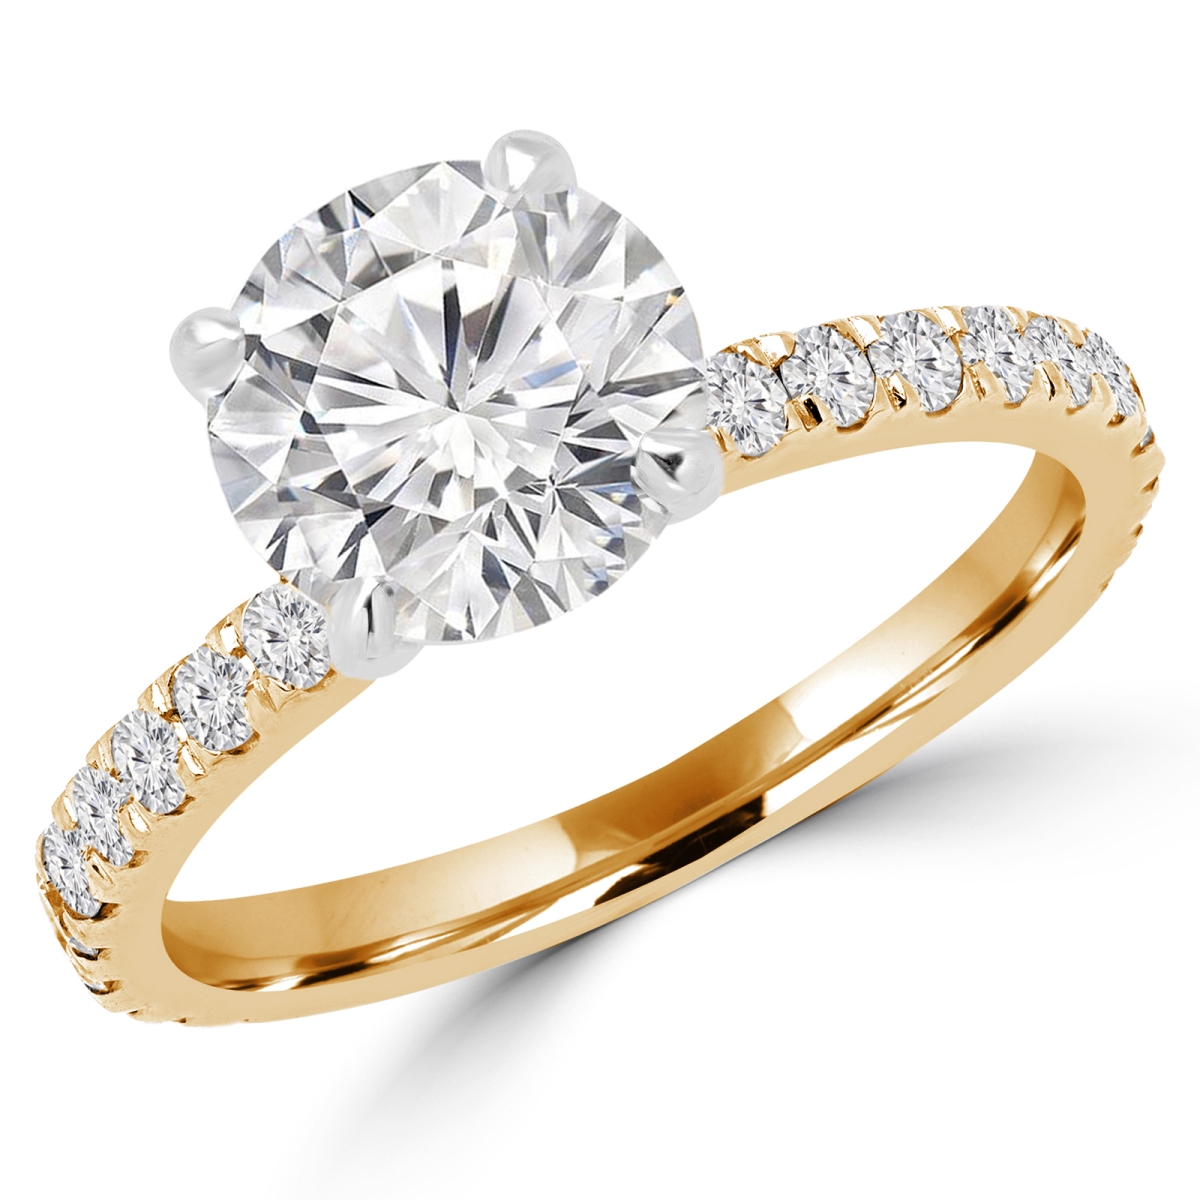 Picture of Majesty Diamonds MD160340-8.5 1 CTW Round Cut Diamond Multi Stone Engagement Ring in 14K Yellow Gold - Size 8.5